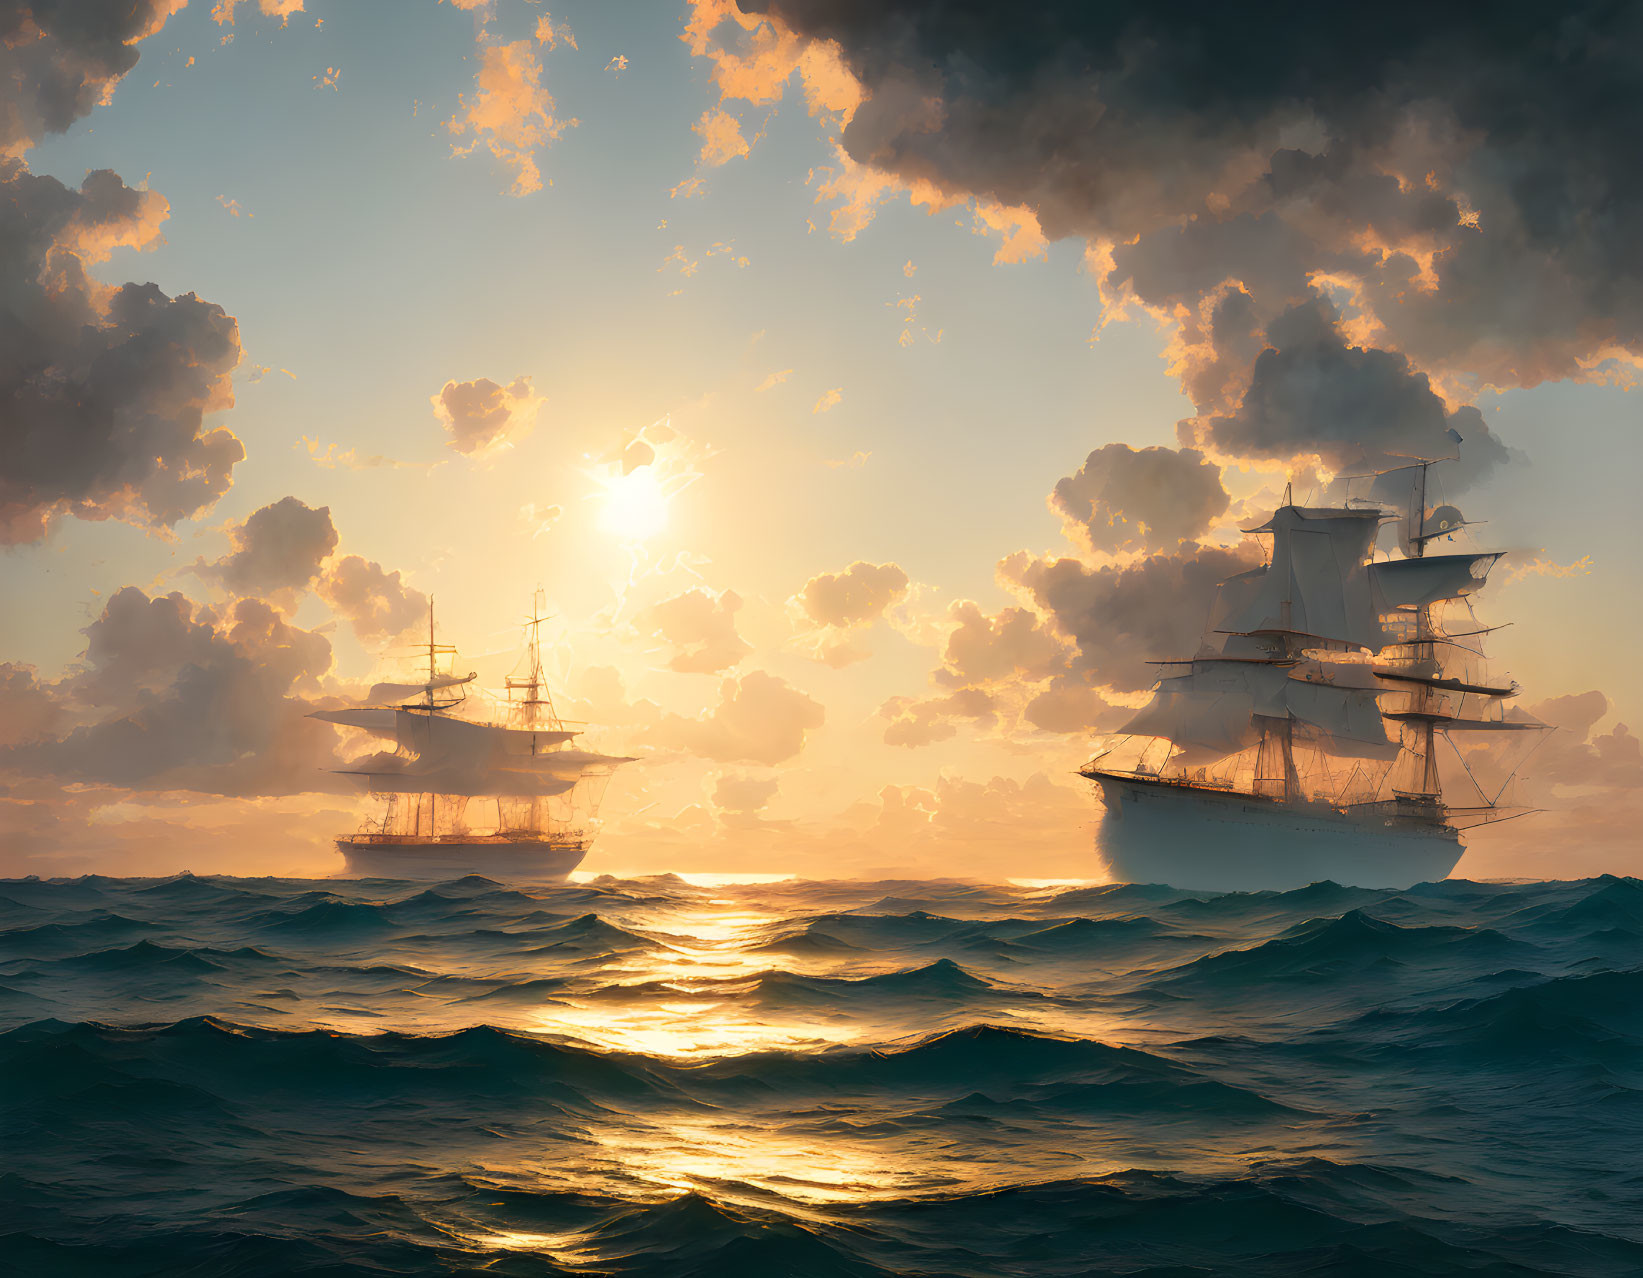 Tall ships sailing on the ocean at sunset with golden sunlight and dramatic clouds